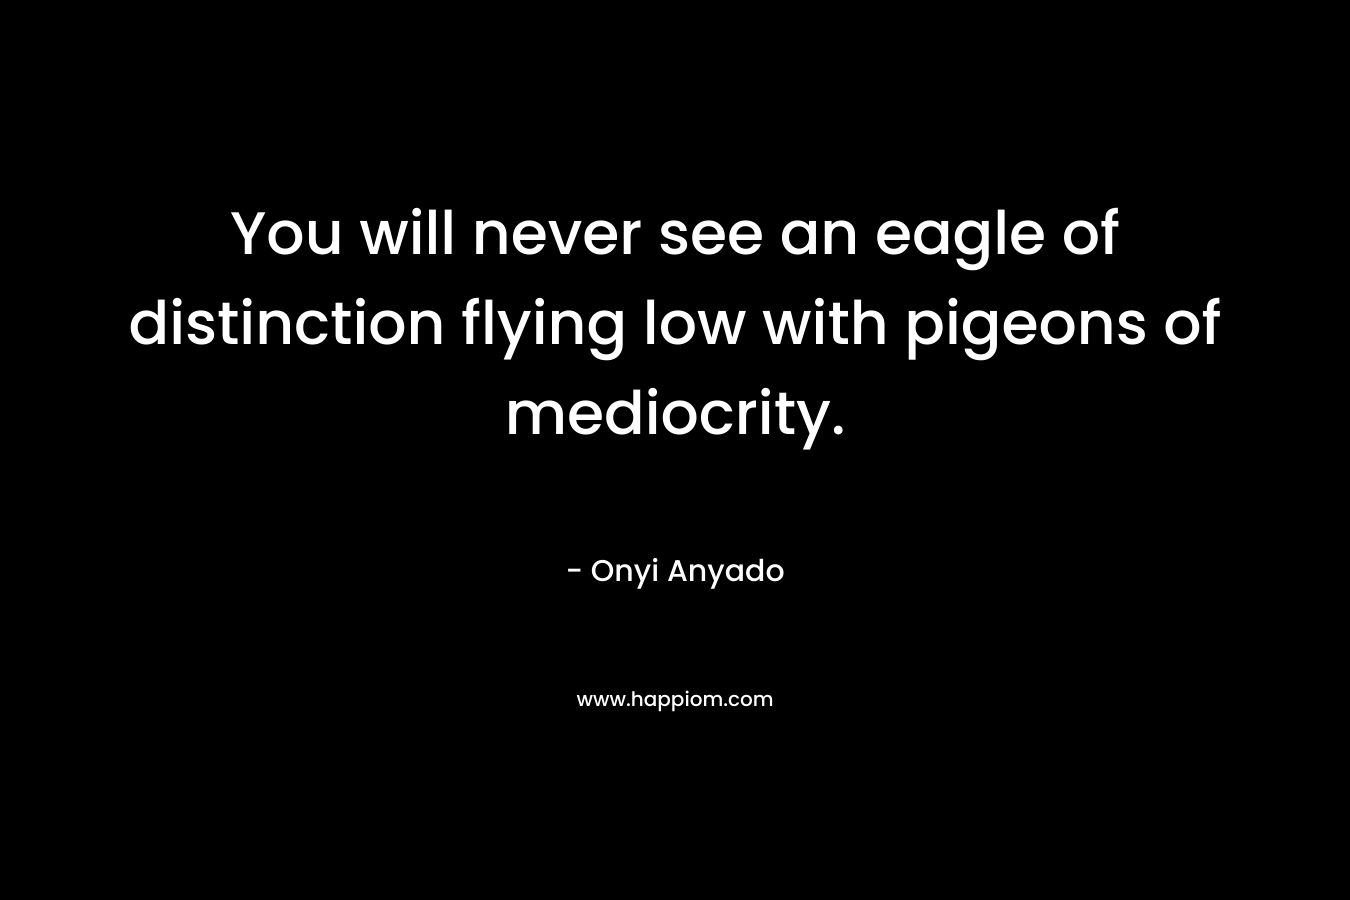 You will never see an eagle of distinction flying low with pigeons of mediocrity. – Onyi Anyado